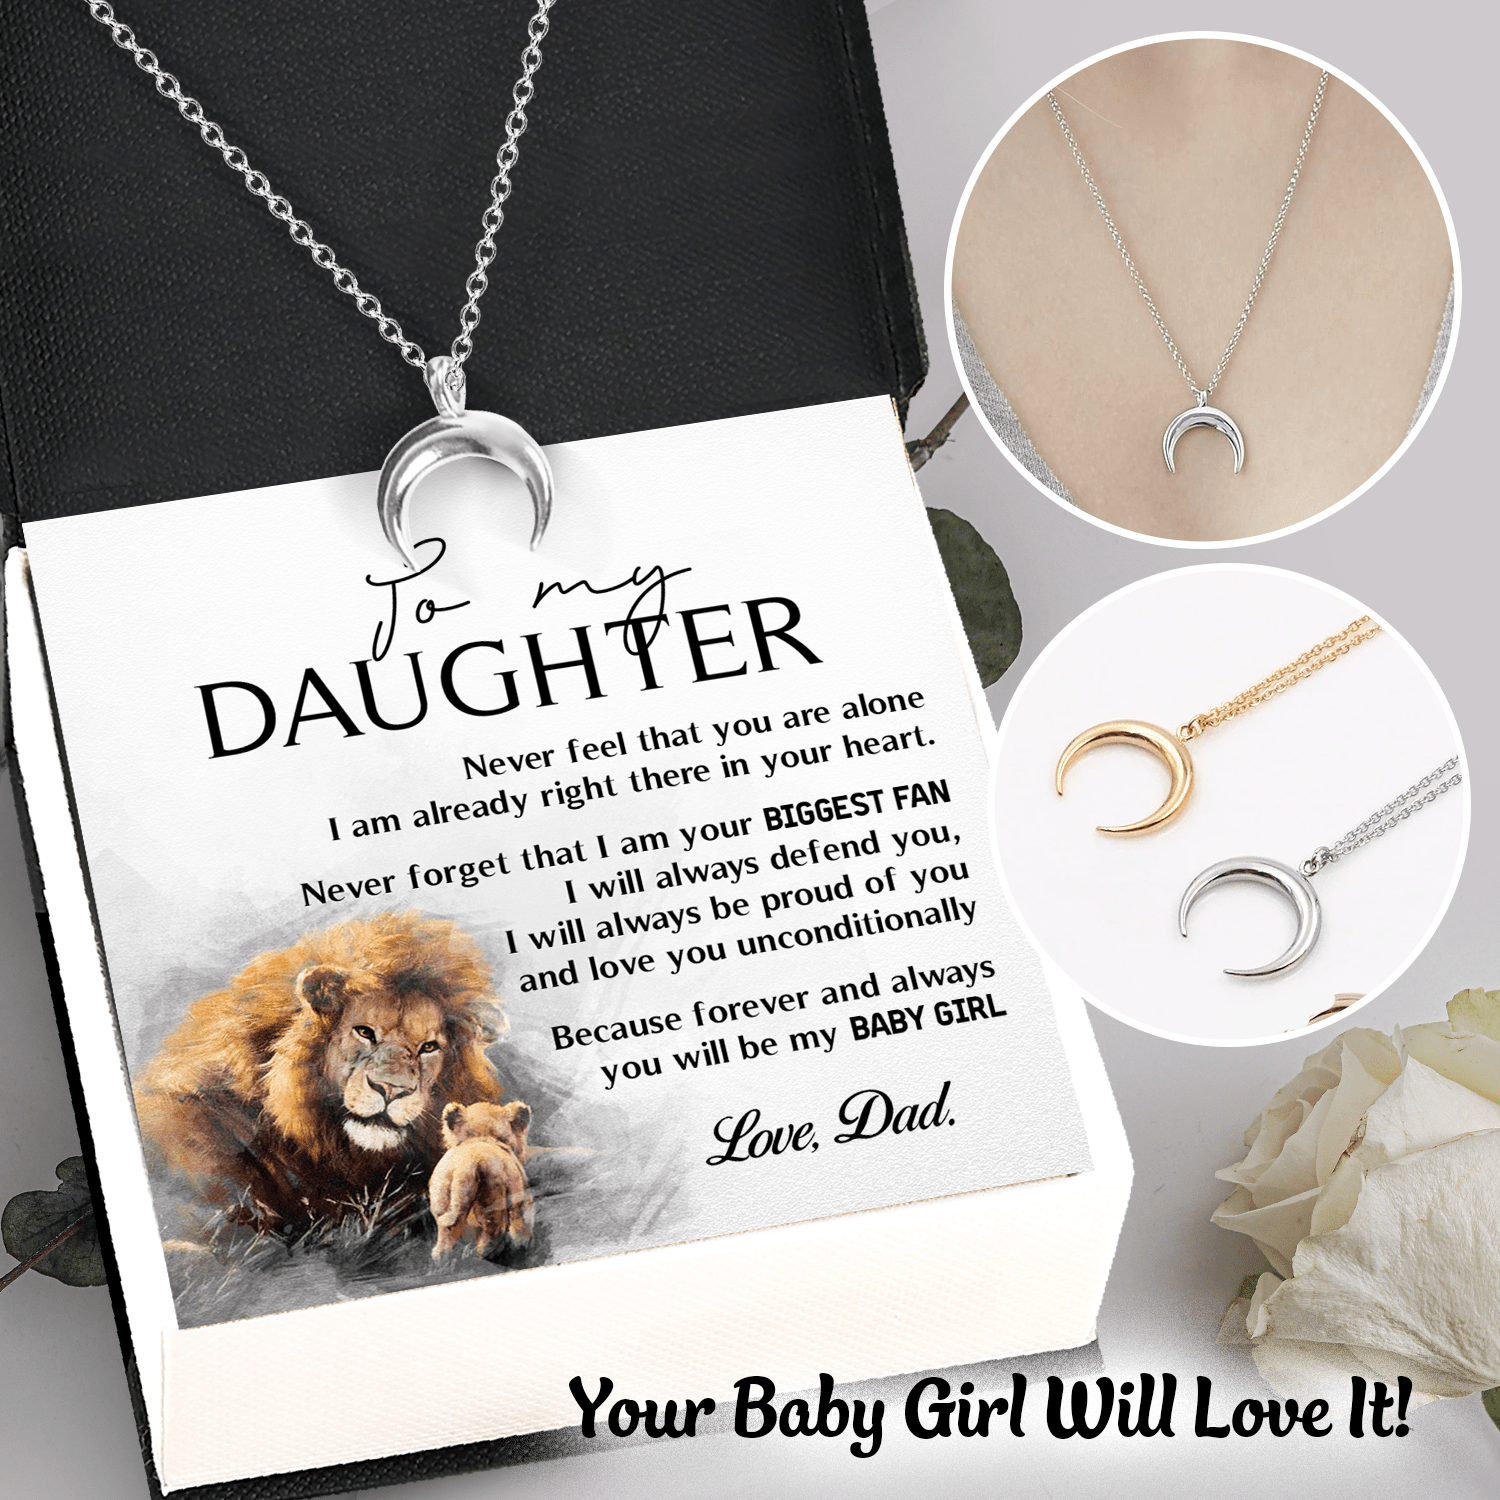 Luxury Moon Necklace - Family - To My Daughter - Never Forget That I Am Your Biggest Fan - Gnns17002